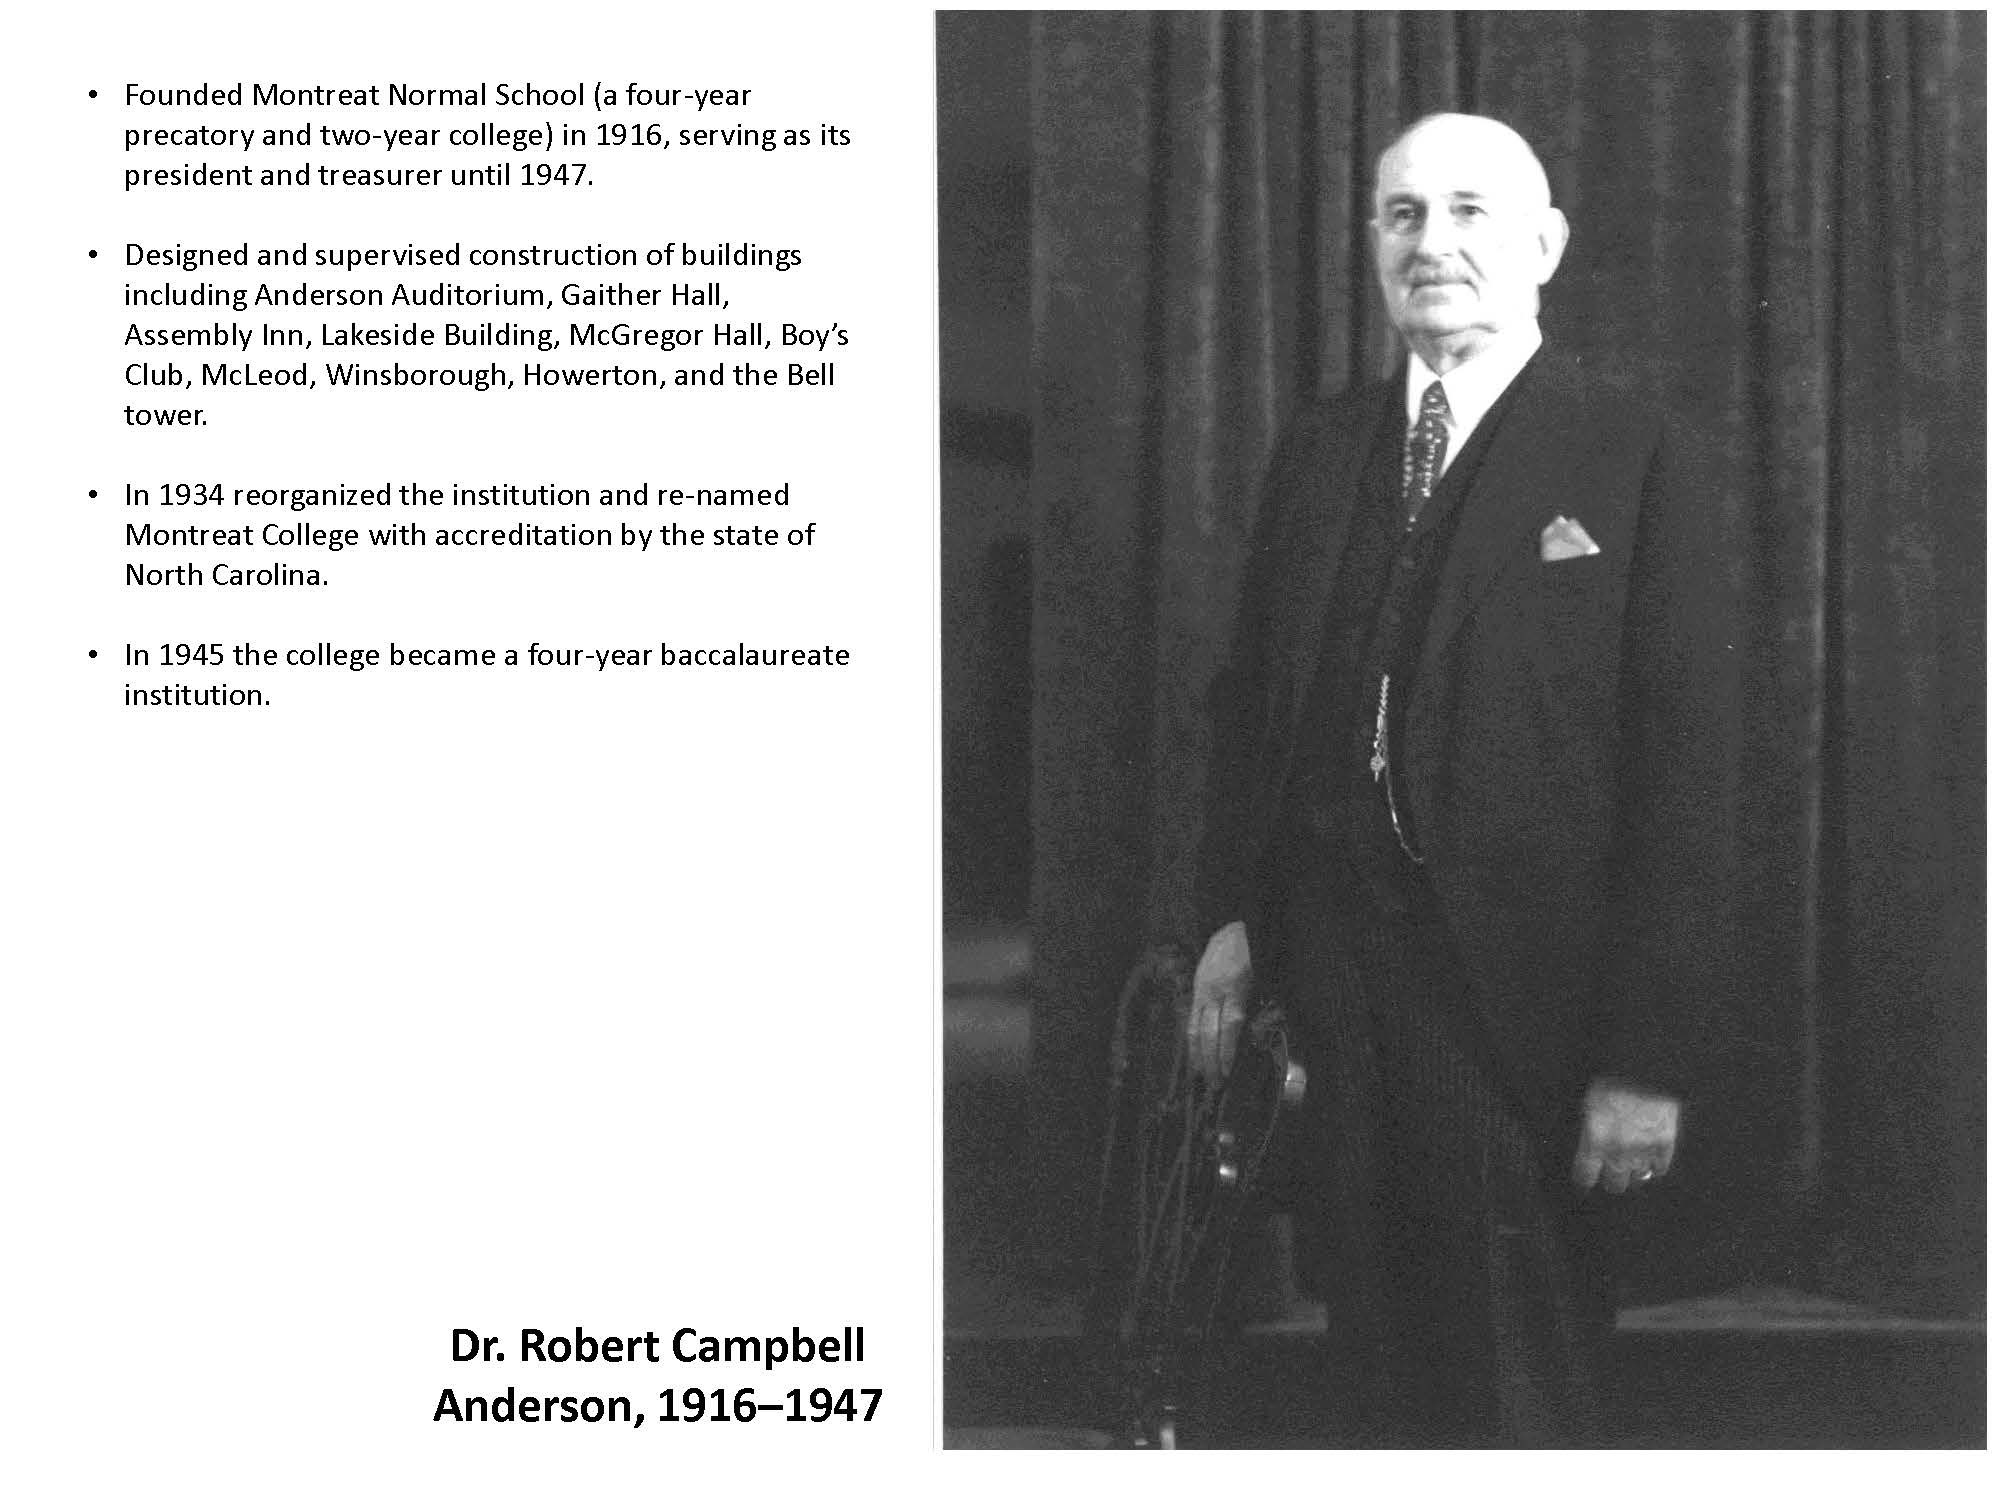 Dr. Robert Campbell Anderson